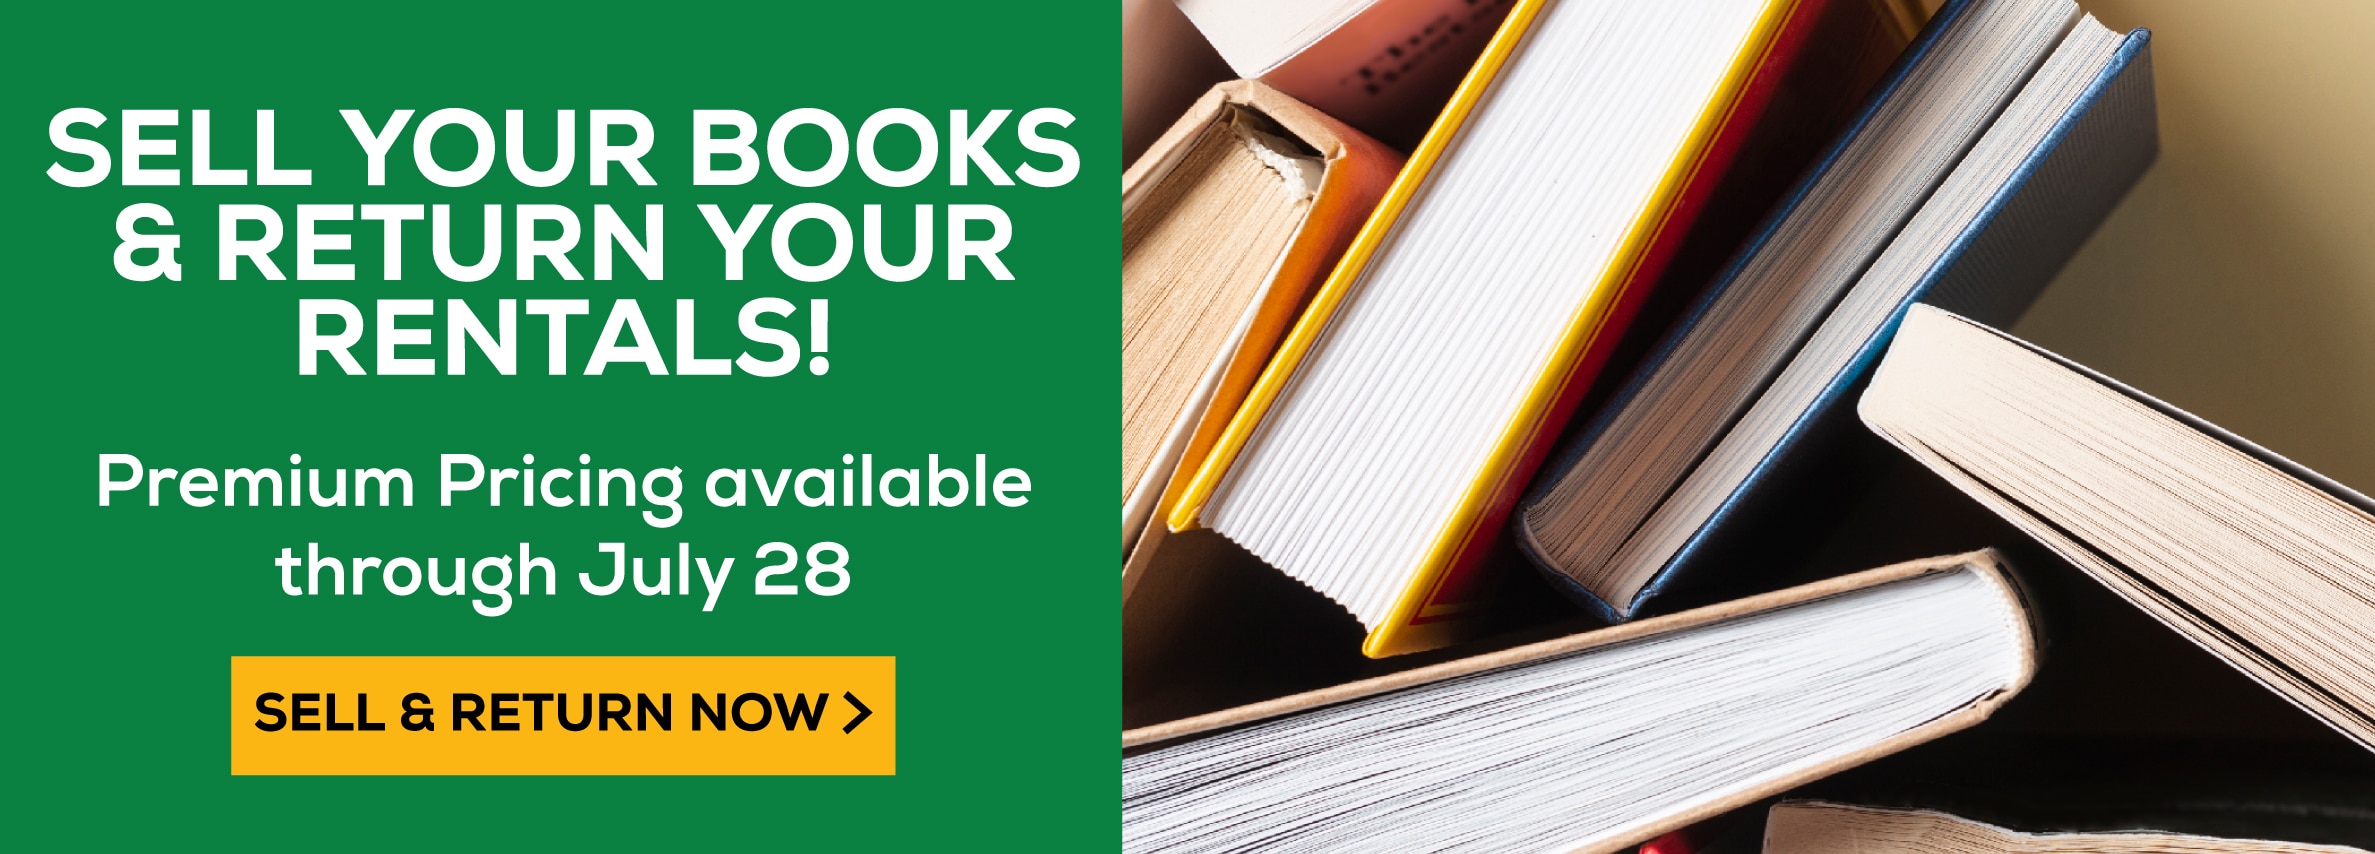 Sell your textbooks! Premium pricing available through July 28. Sell now>